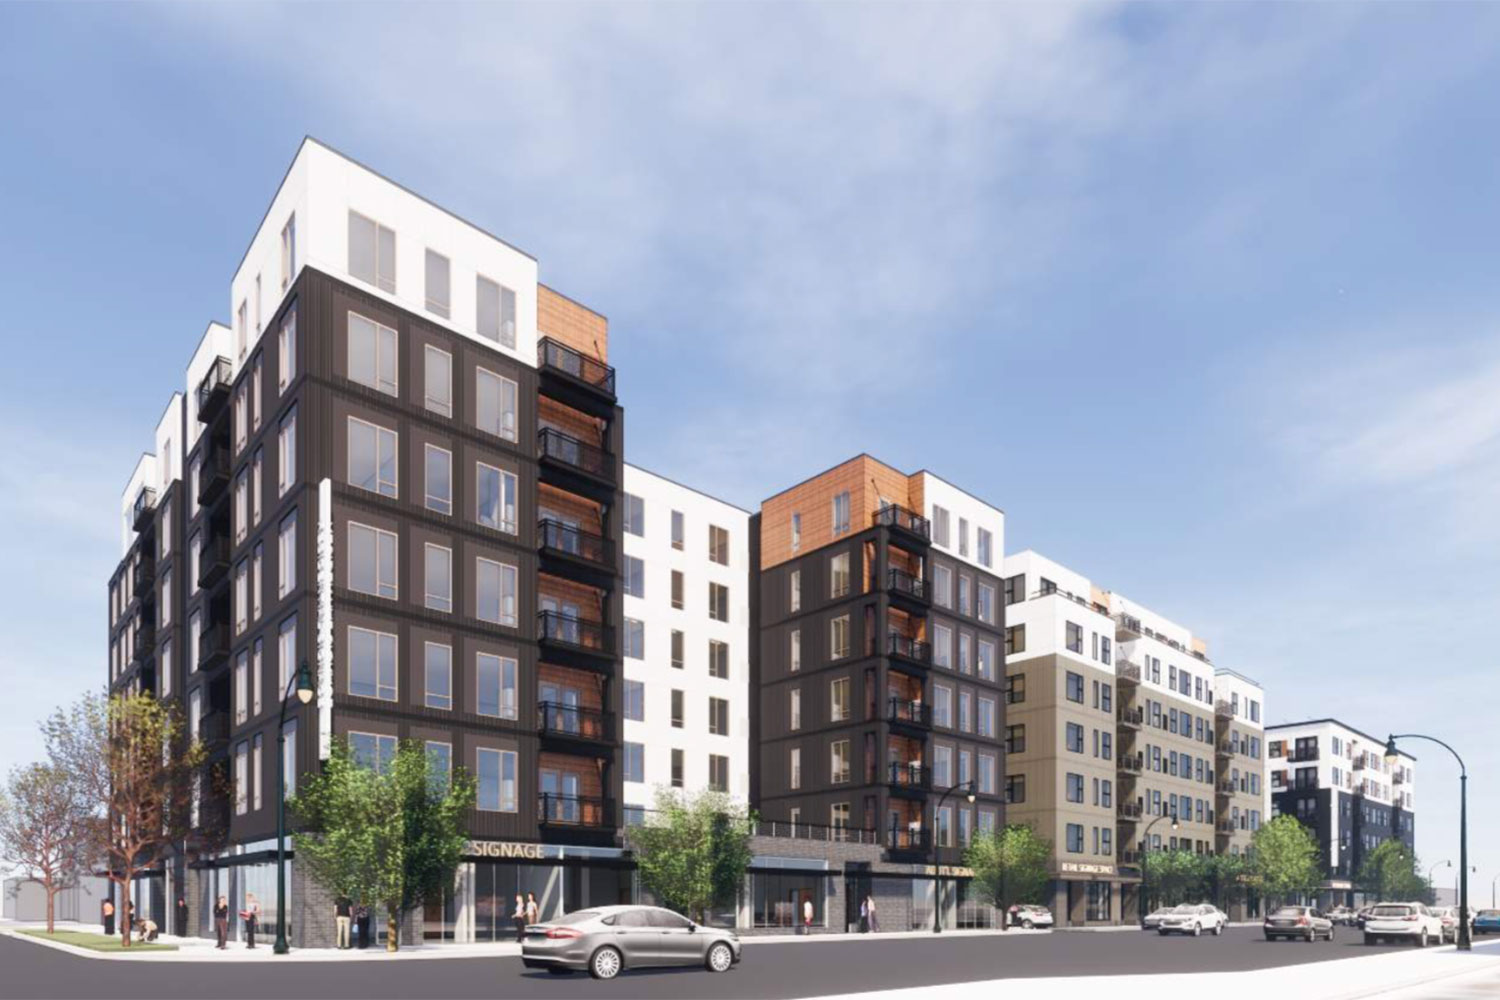 Retail requirement reversed for LynLake apartment